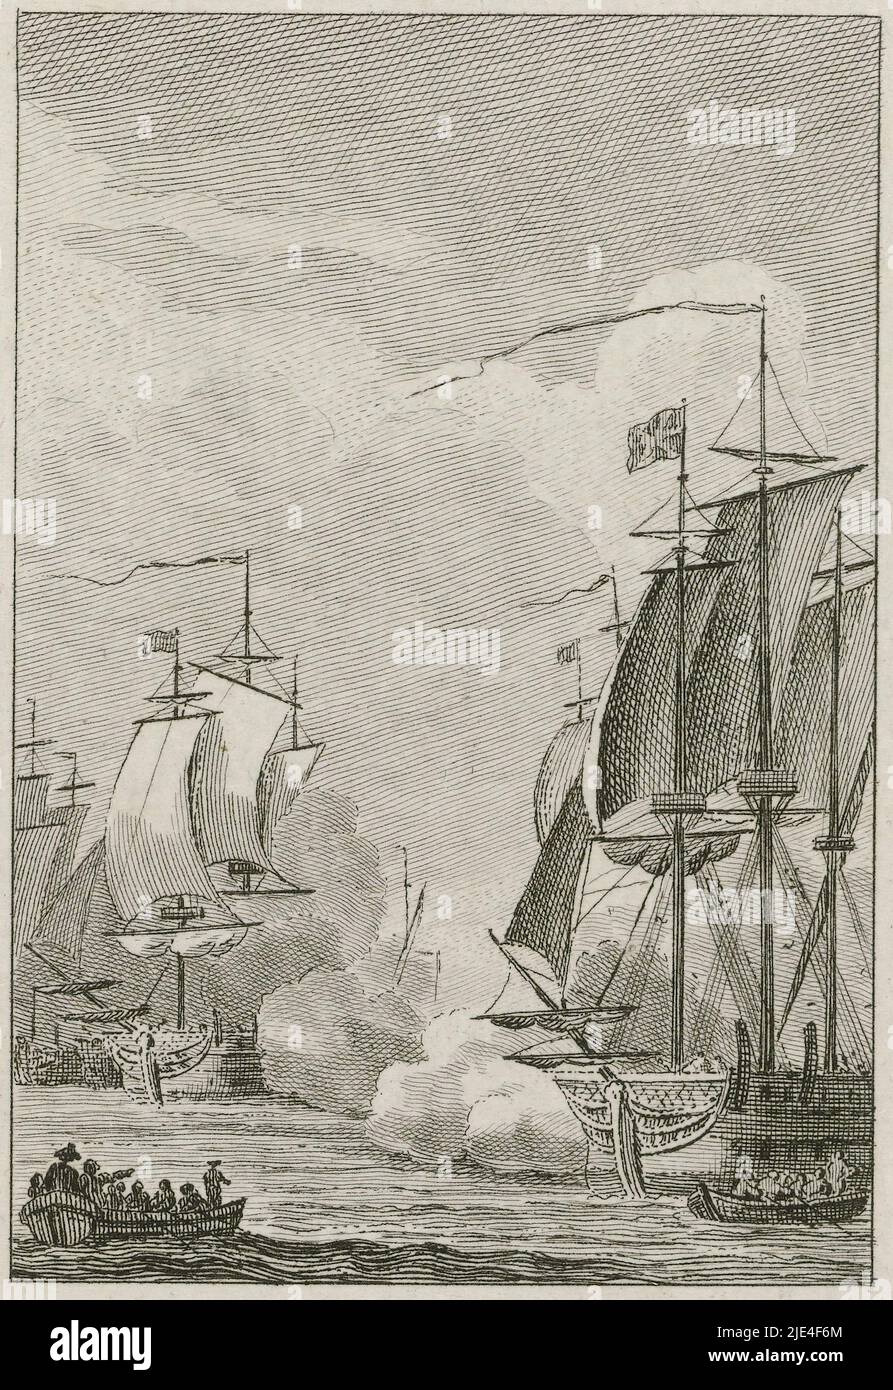 Treffen tussen Fielding en Van Bylandt, 1779, Reinier Vinkeles (I), after Jacobus Buys, 1780 - 1795, Treffen between an English squadron under commander Charles Fielding and a Dutch squadron under Lodewijk van Bylandt escorting a convoy, off Isle of Wight on 31 December 1779., print maker: Reinier Vinkeles (I), print maker: Cornelis Bogerts, intermediary draughtsman: Jacobus Buys, Northern Netherlands, 1780 - 1795, paper, etching, engraving, h 158 mm - w 112 mm Stock Photo